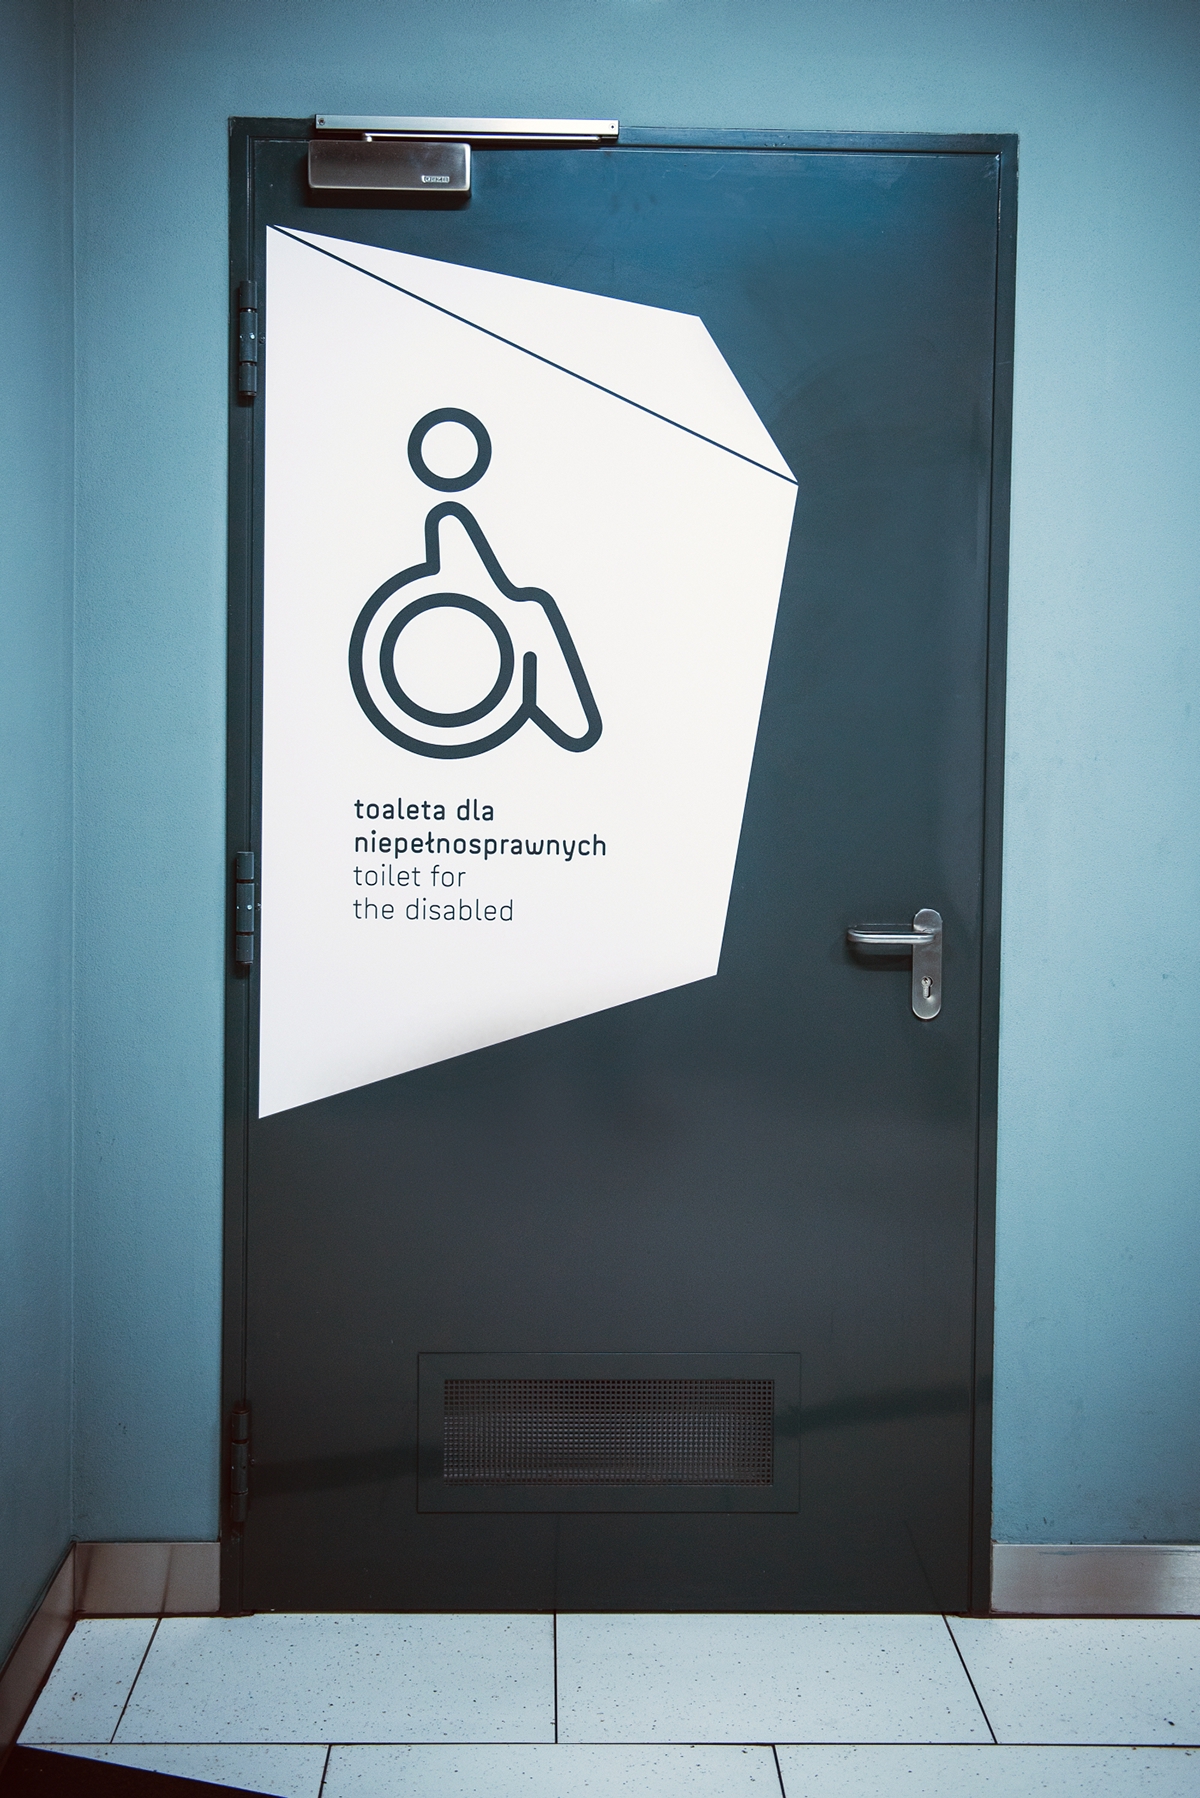 wayfinding system communication pictogrammes pictograms icons set environmental design Signage map shopping mall